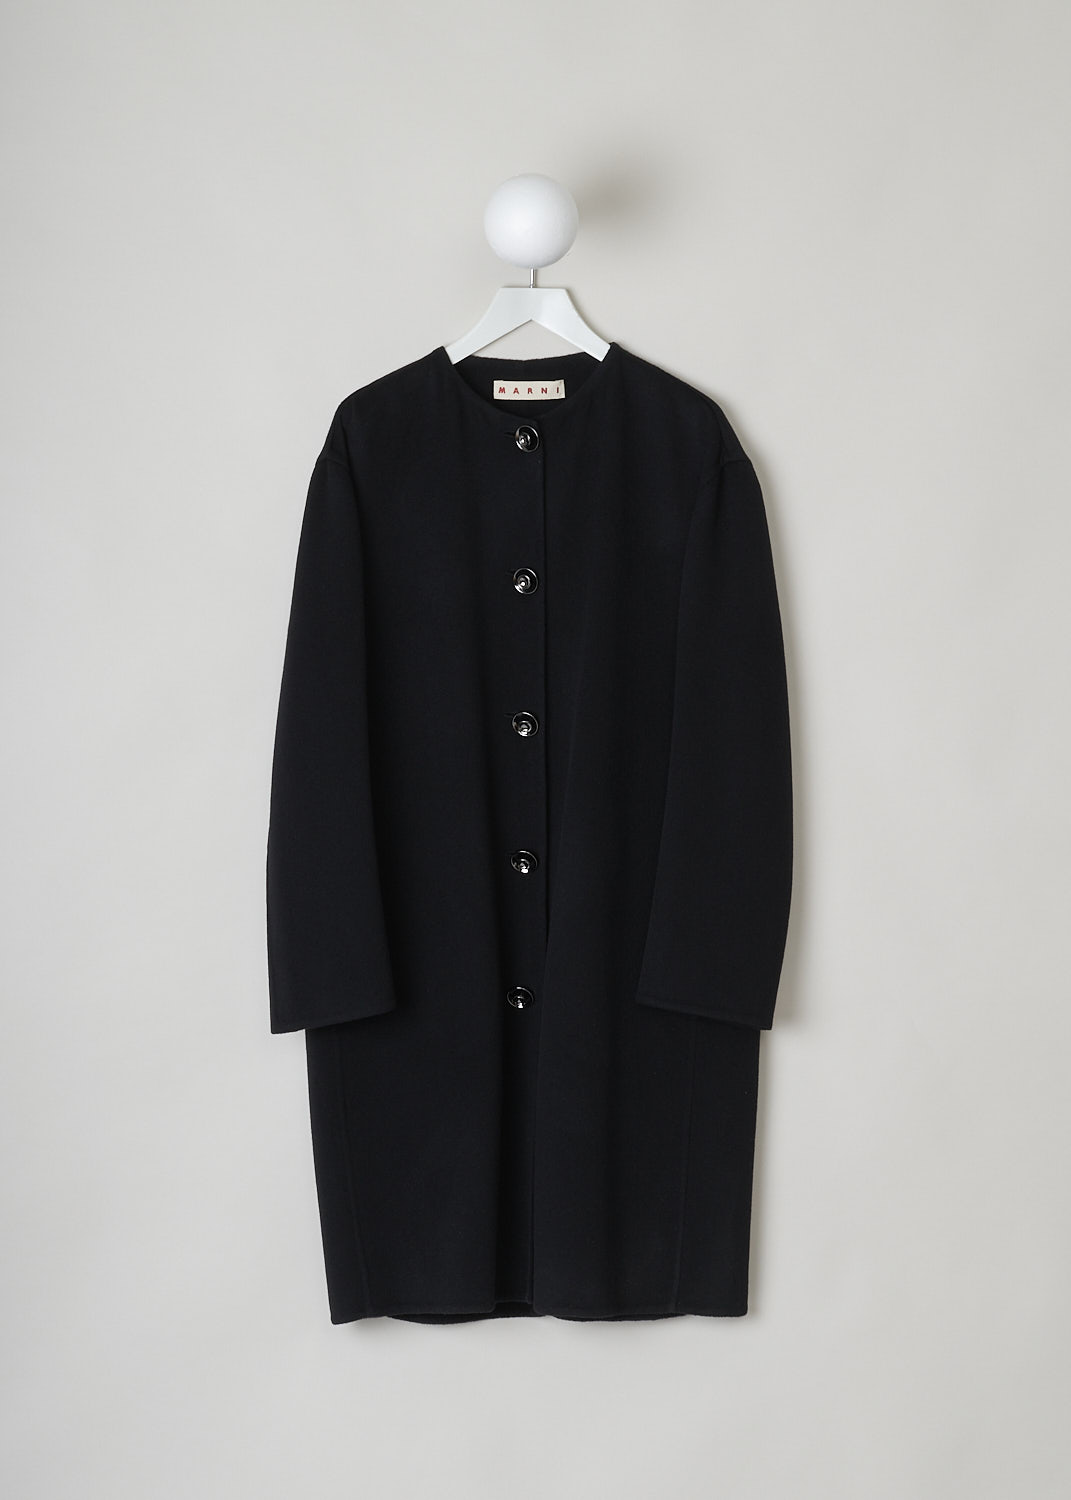 MARNI, LONG BLACK DUSTER COAT, SPMA0048KU_TW888_00N99, Front, Black, This long collarless duster coat in black features a front button closure with round metal buttons. The long sleeves are lined. Slanted pockets are concealed in the side seams. The coat has a straight hemline. 
